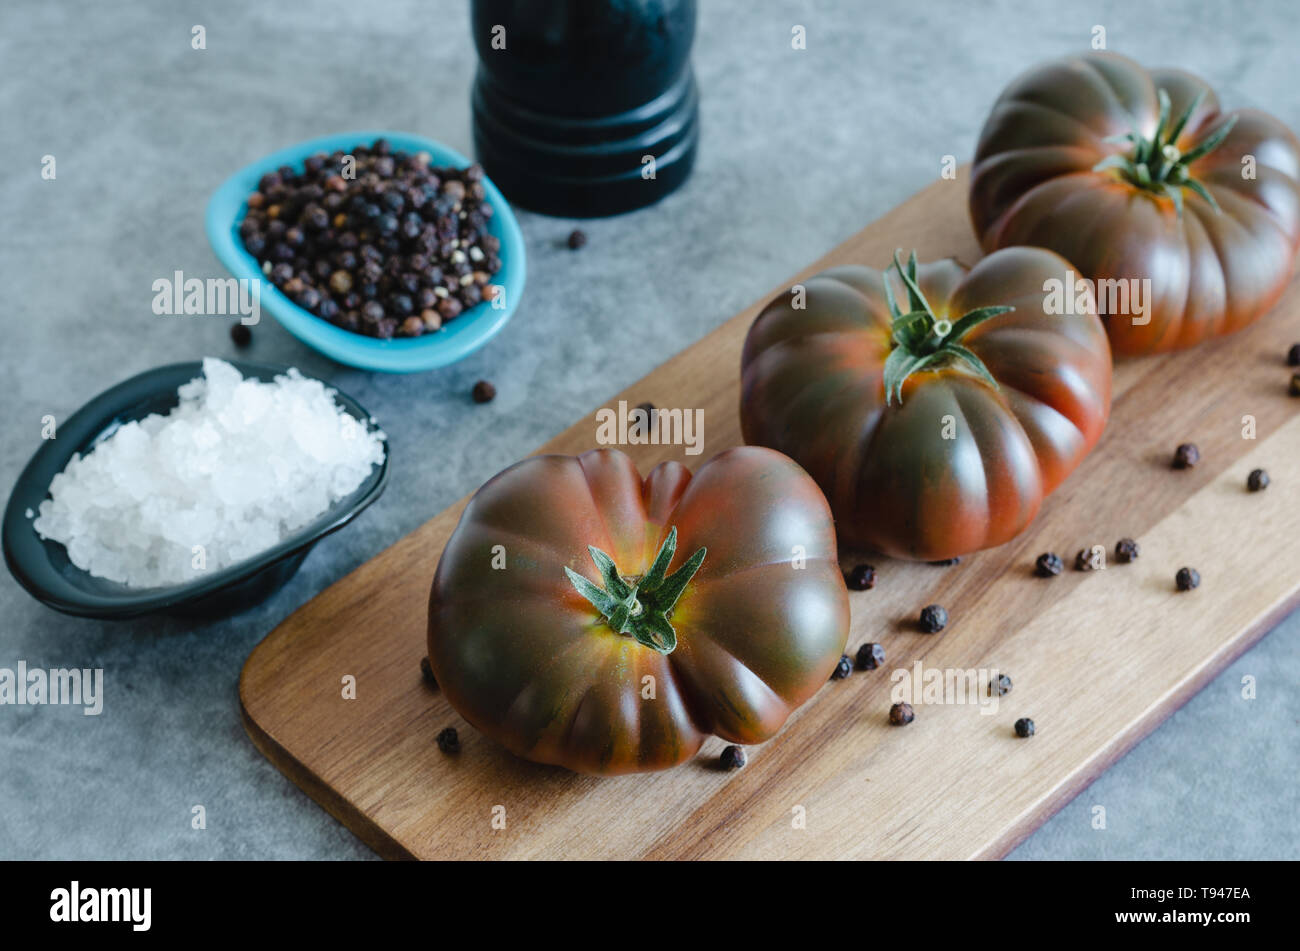 Sweet Marmande tomatoes whole on wooden board. Close view Stock Photo